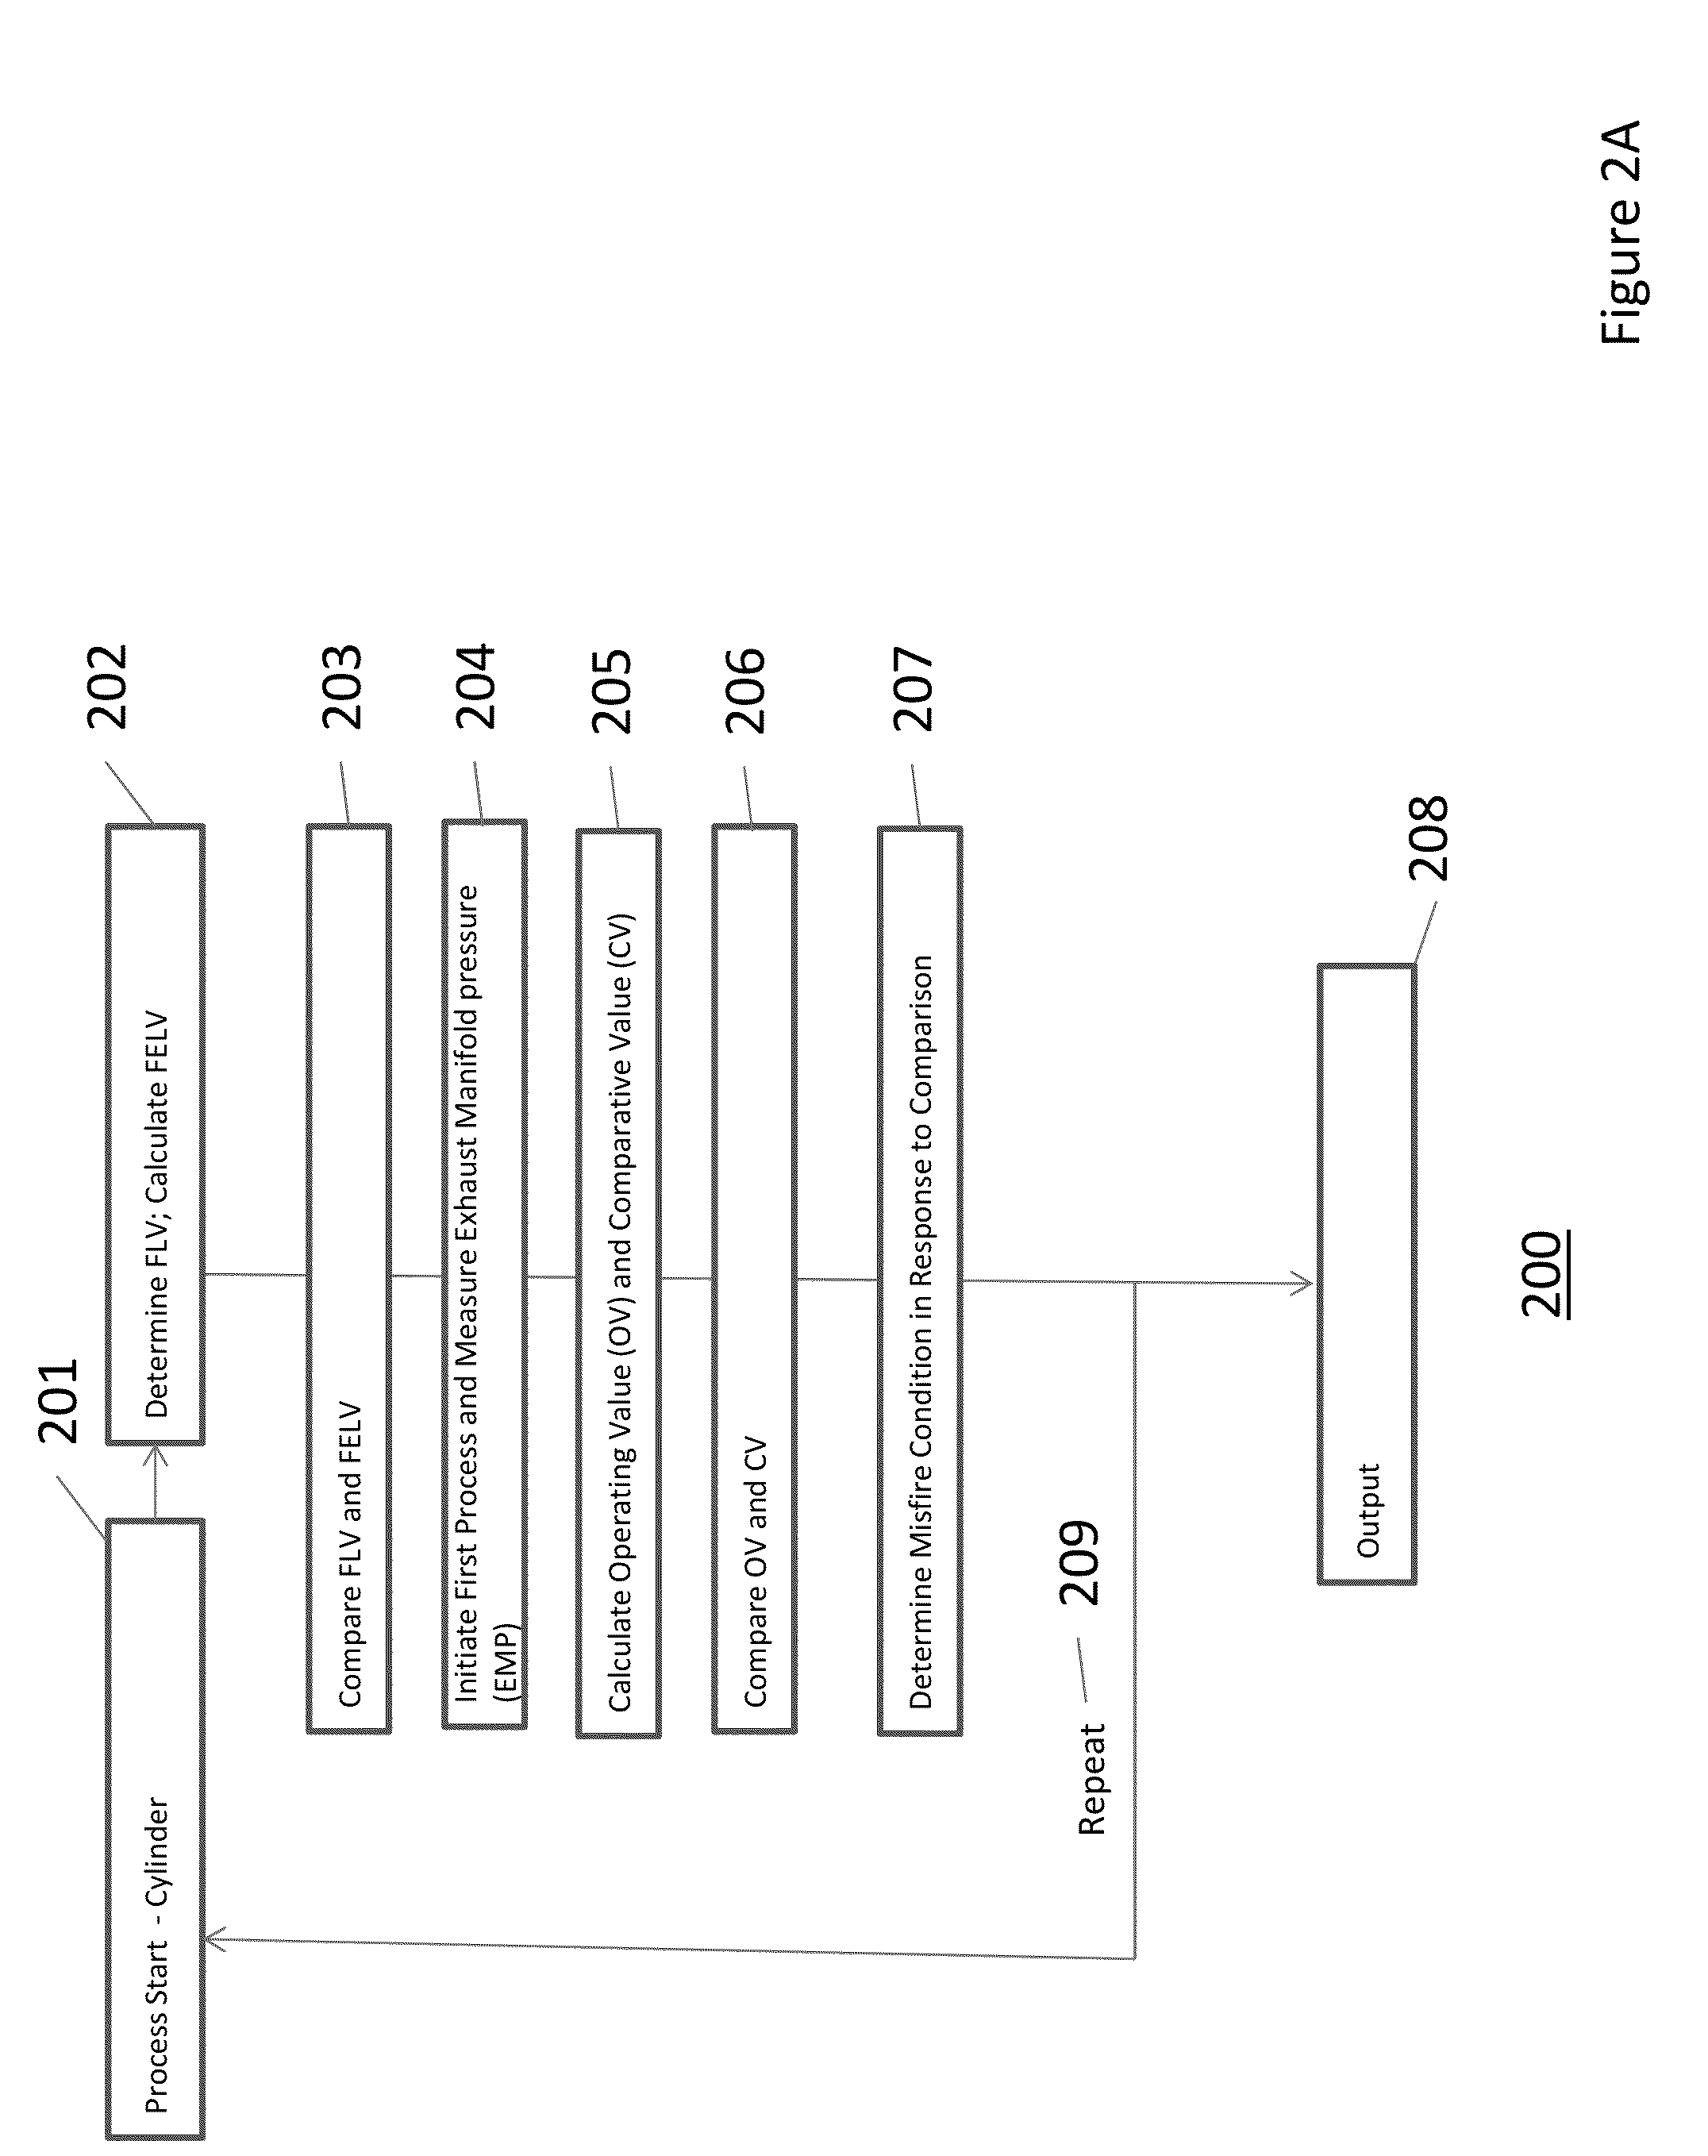 Exhaust manifold pressure based misfire detection for internal combustion engines